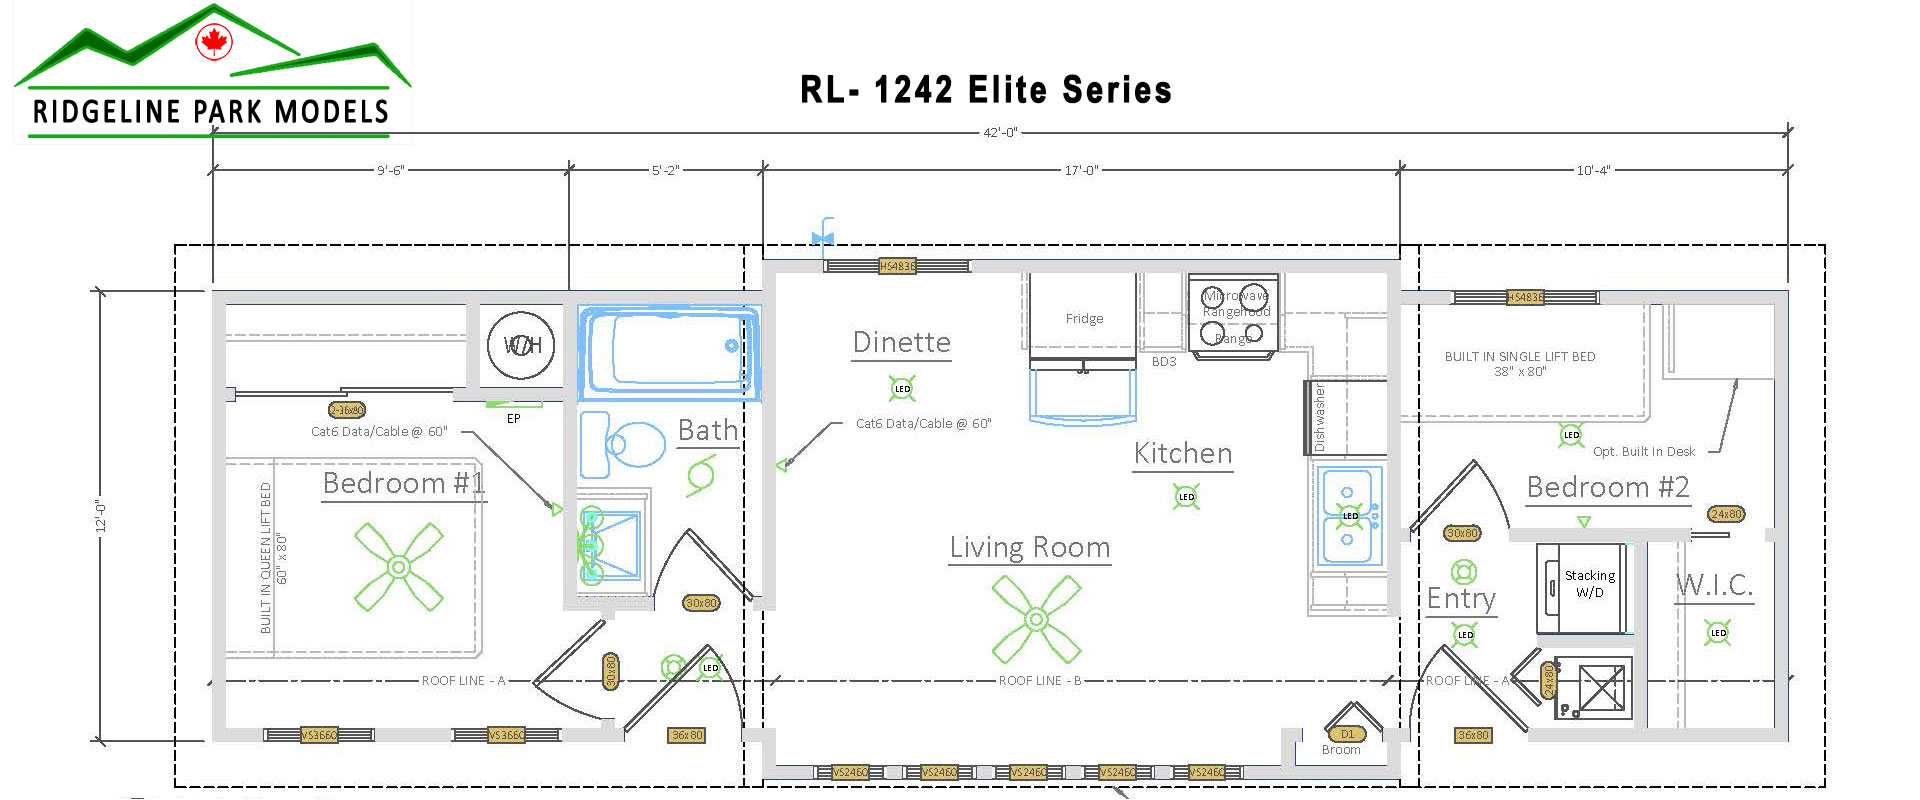 Plan RL-1241 Elite Series from Ridgeline Park Models, serving the Okanagan Valley and all British Columbia locations.